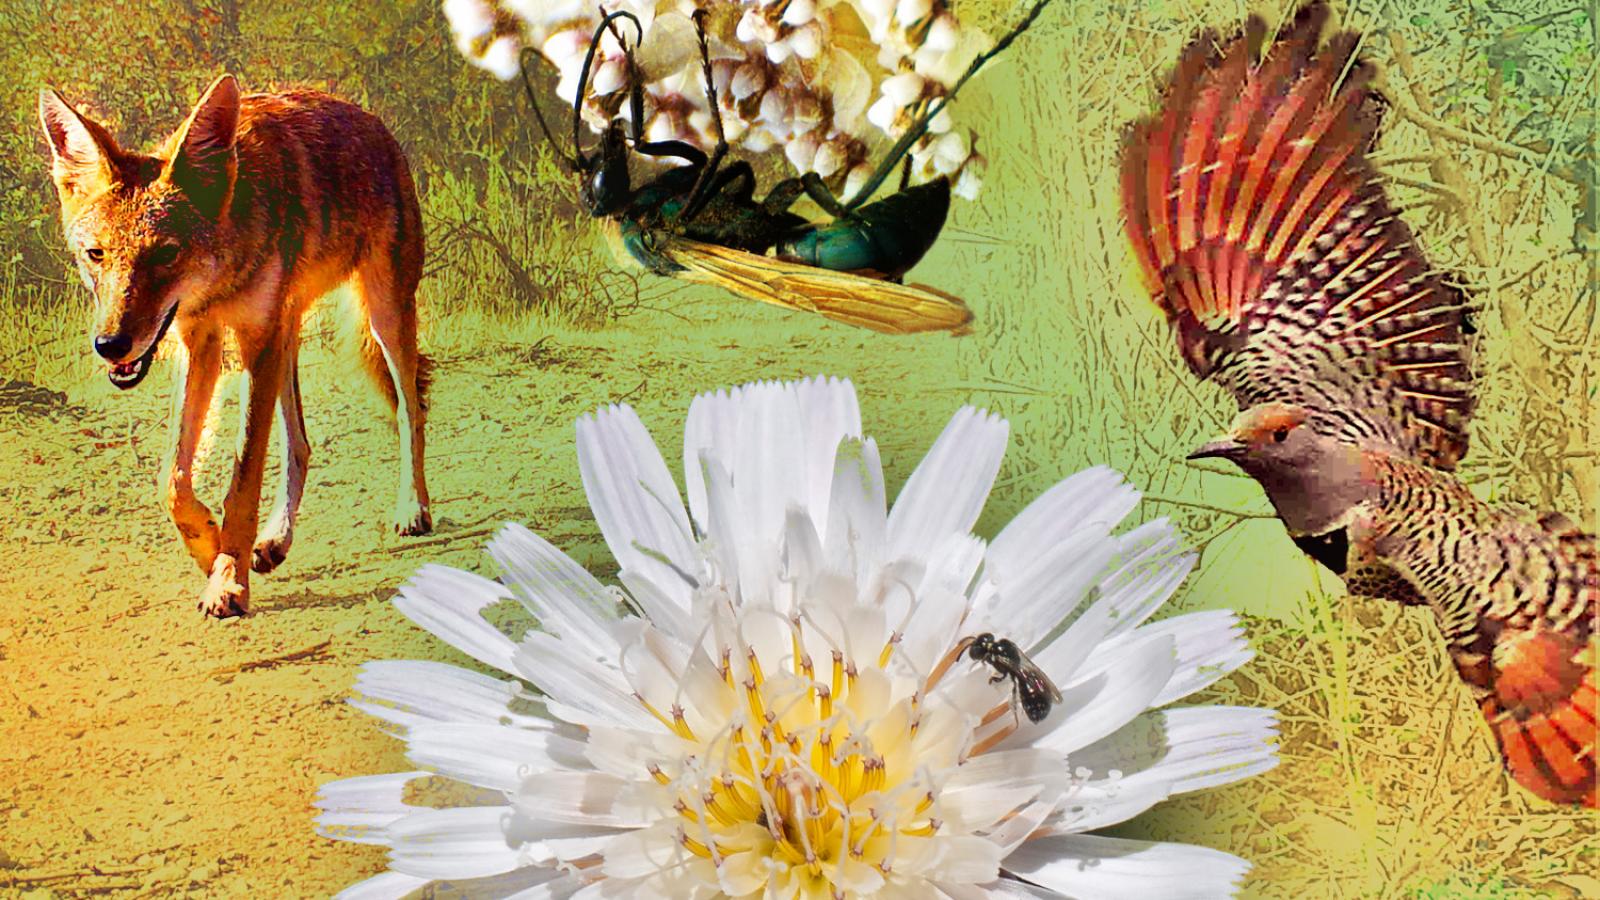 Photo illustration of coyote, insects, flowers, bird at Bernard Field Station